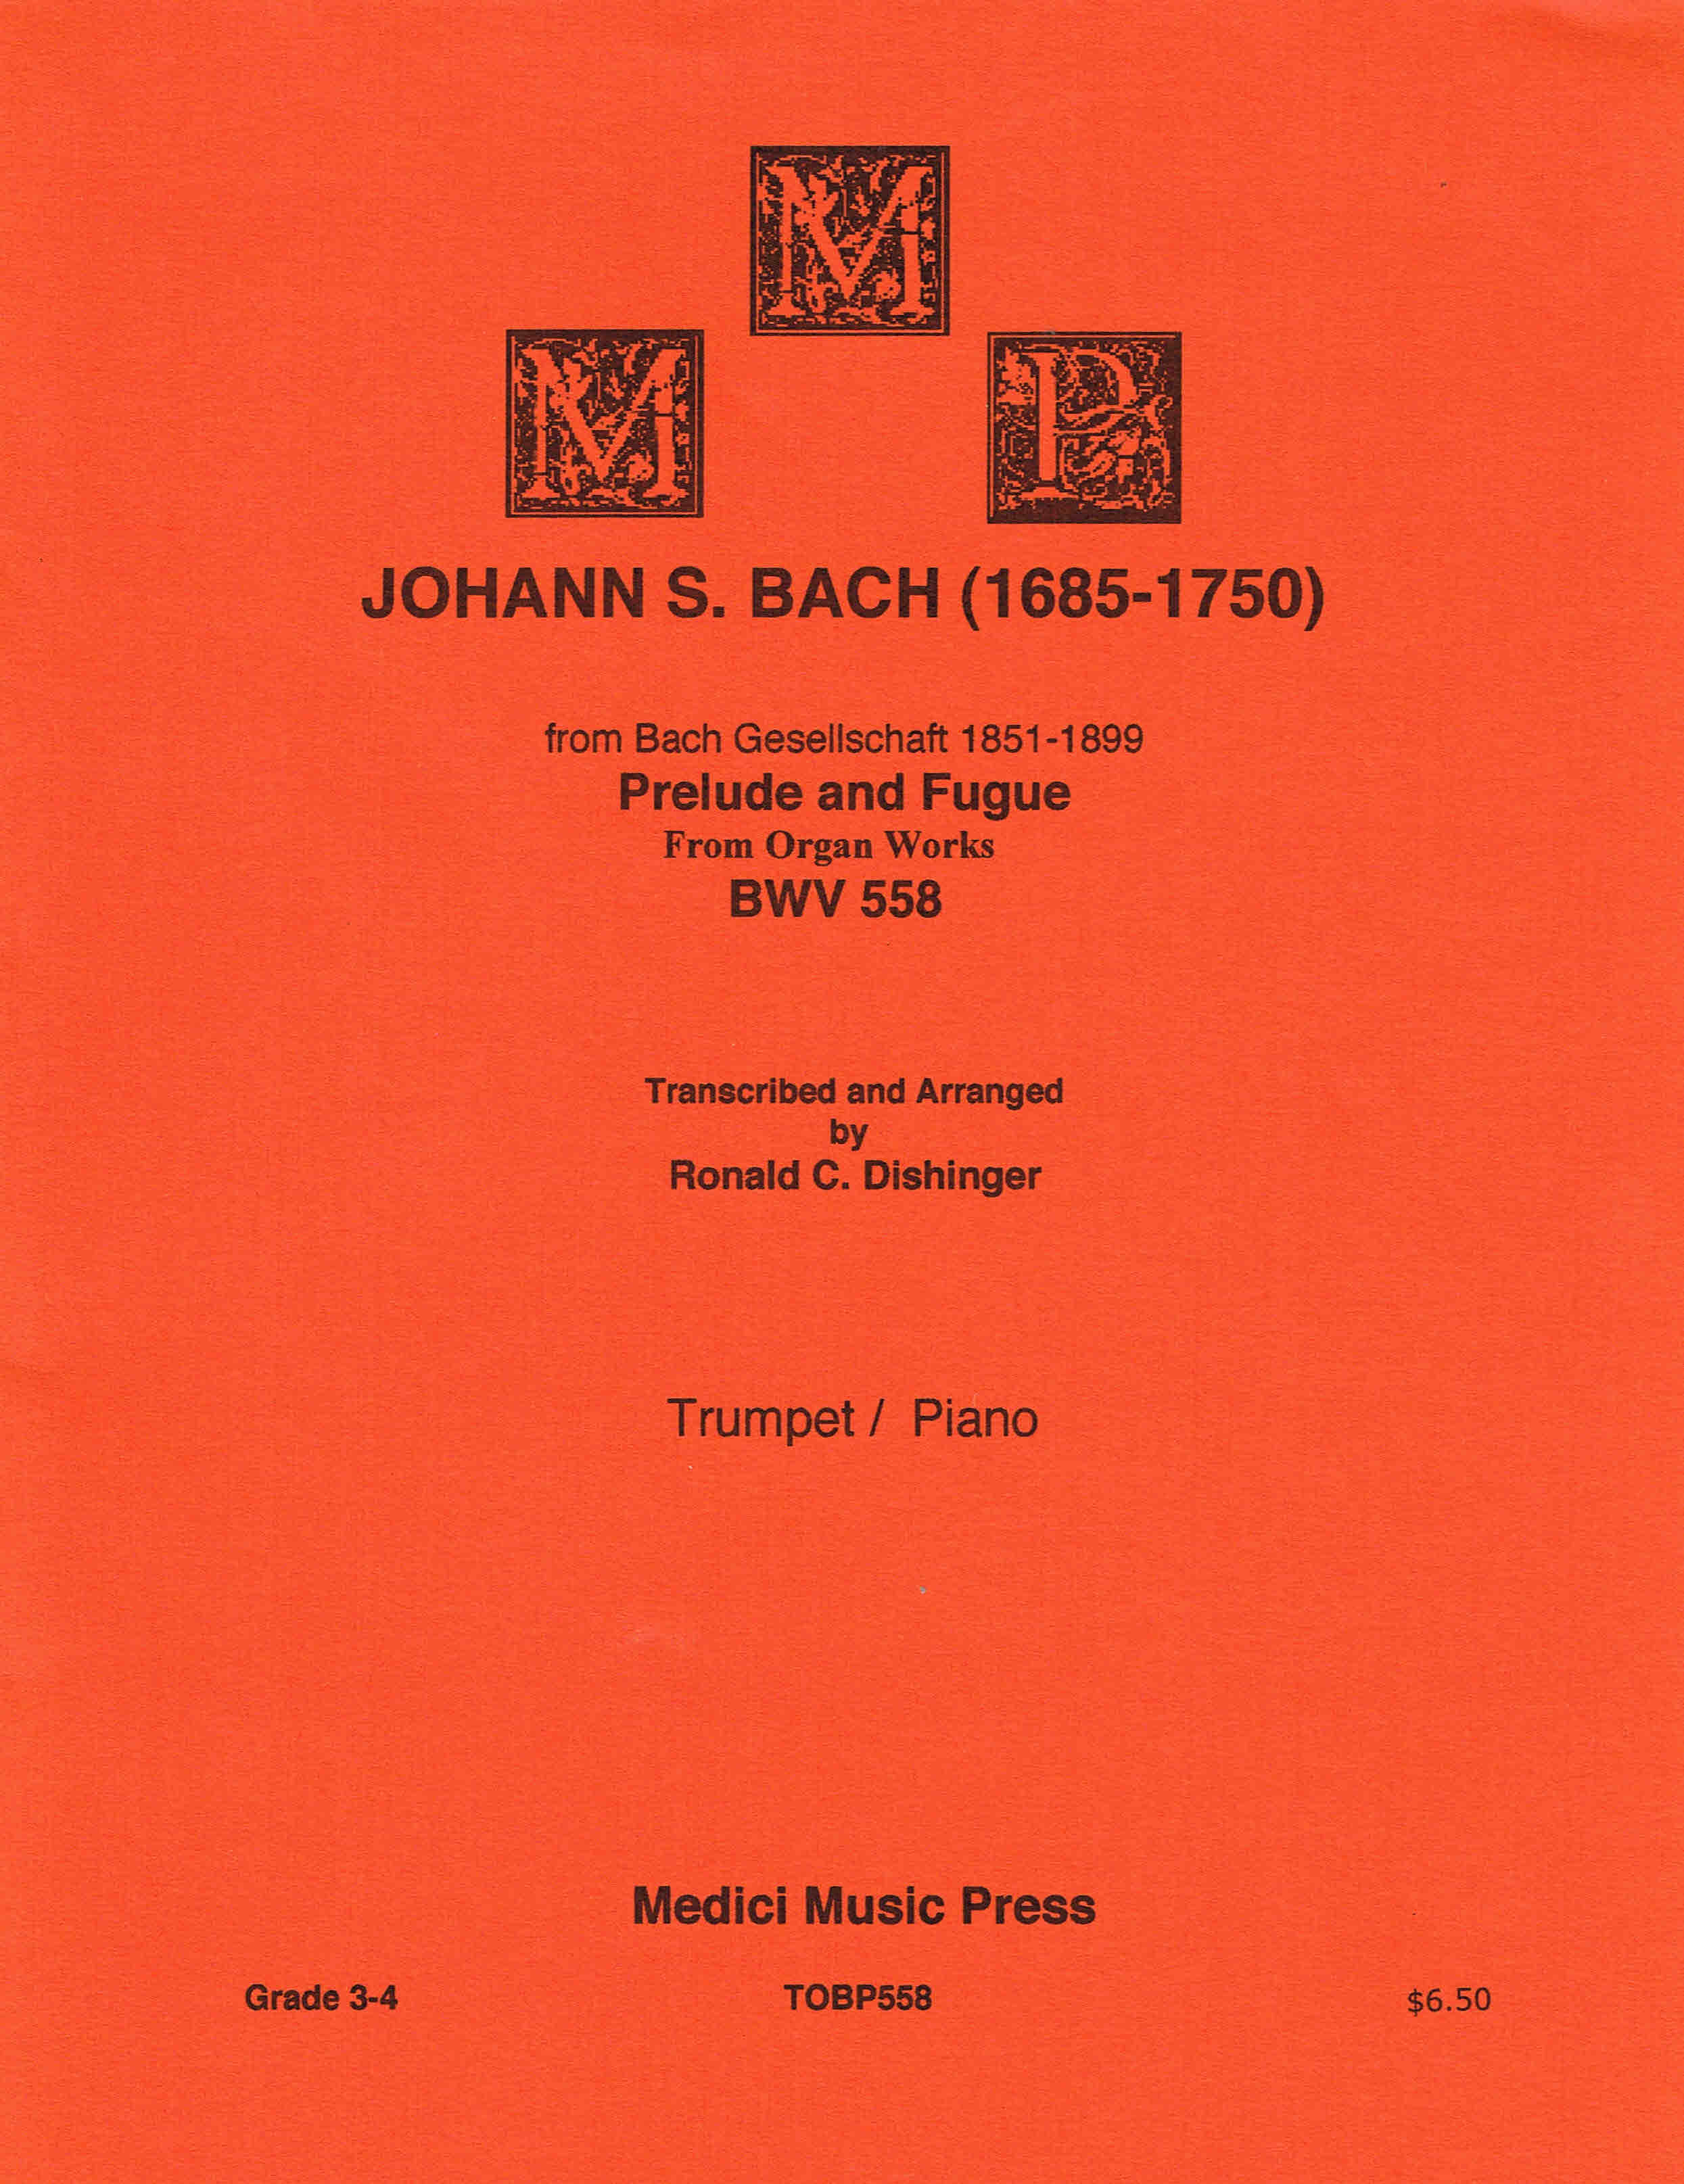 Johann S. Bach -  Prelude and Fugue from Organ Works BWV 558 for Trumpet/Piano.. - Afbeelding 1 van 1